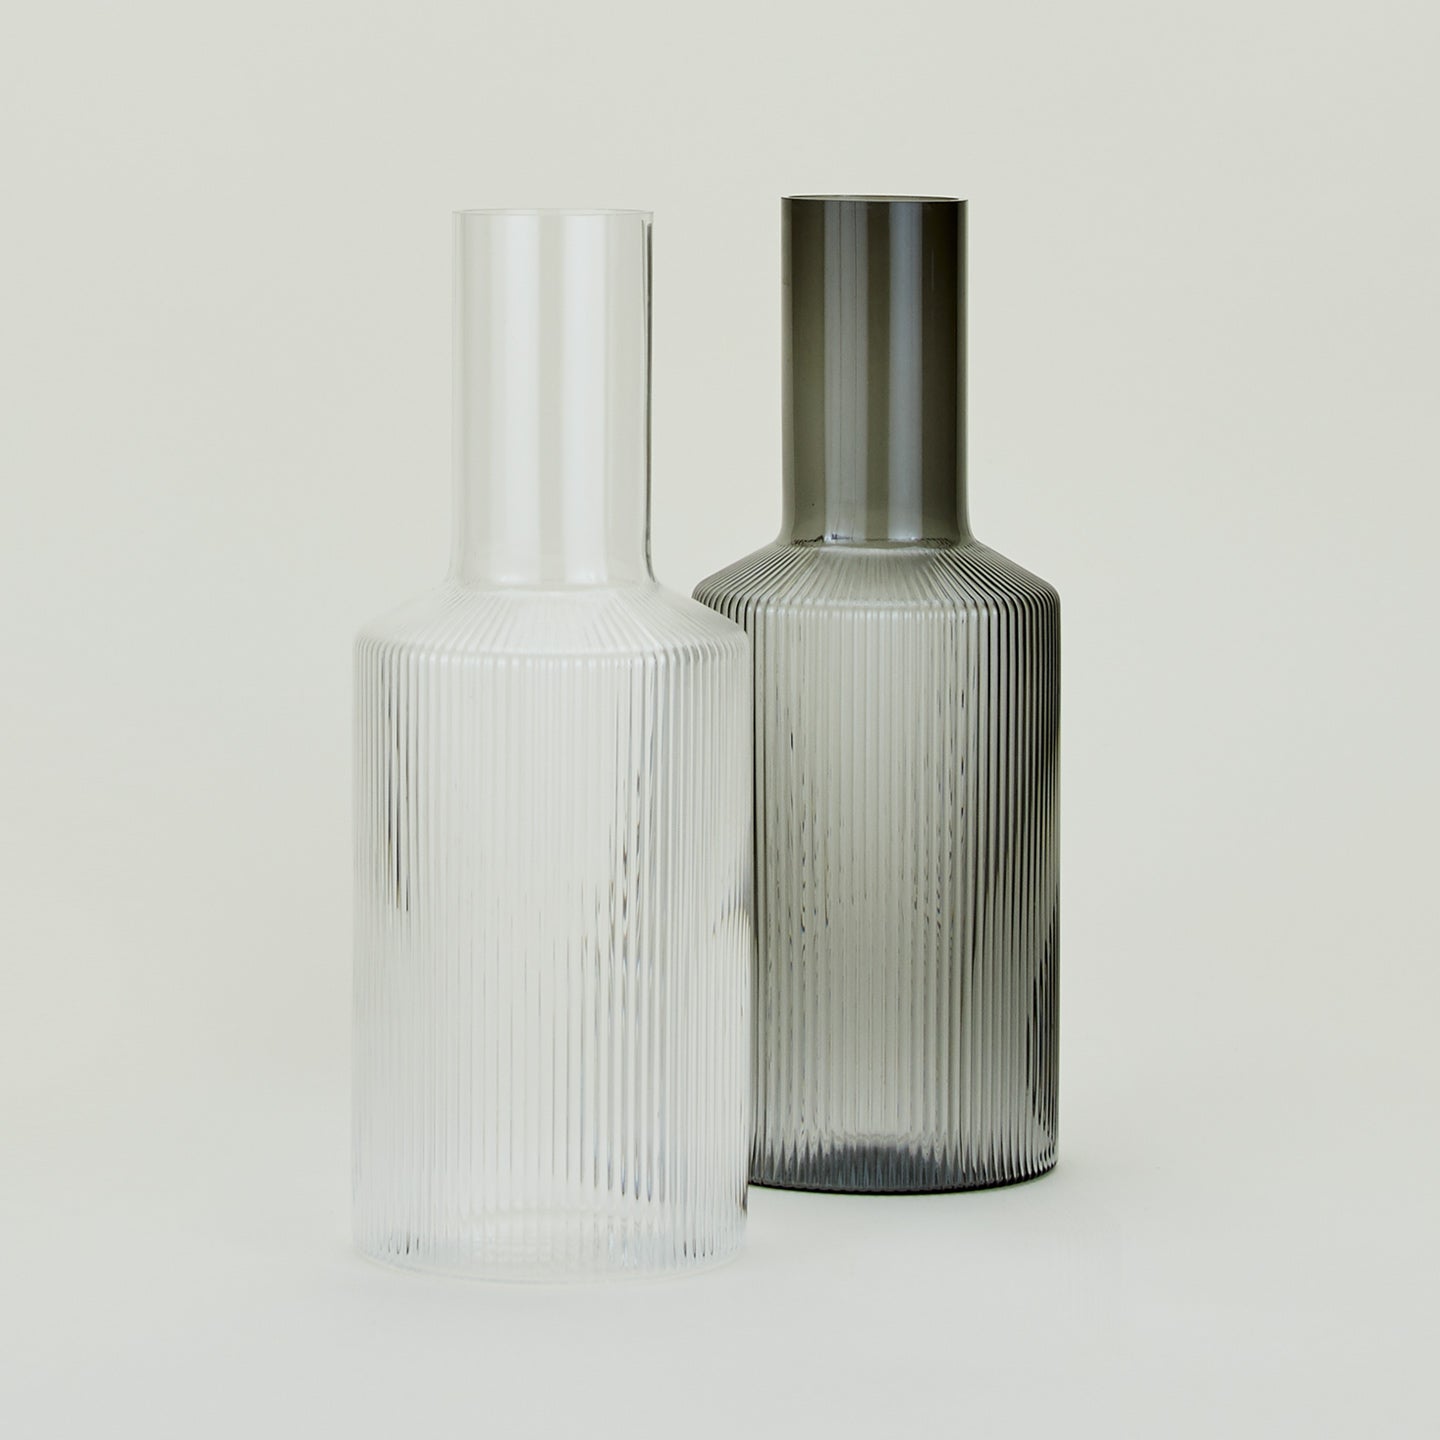 Two Ripple Carafes, one in Grey and one in Clear.